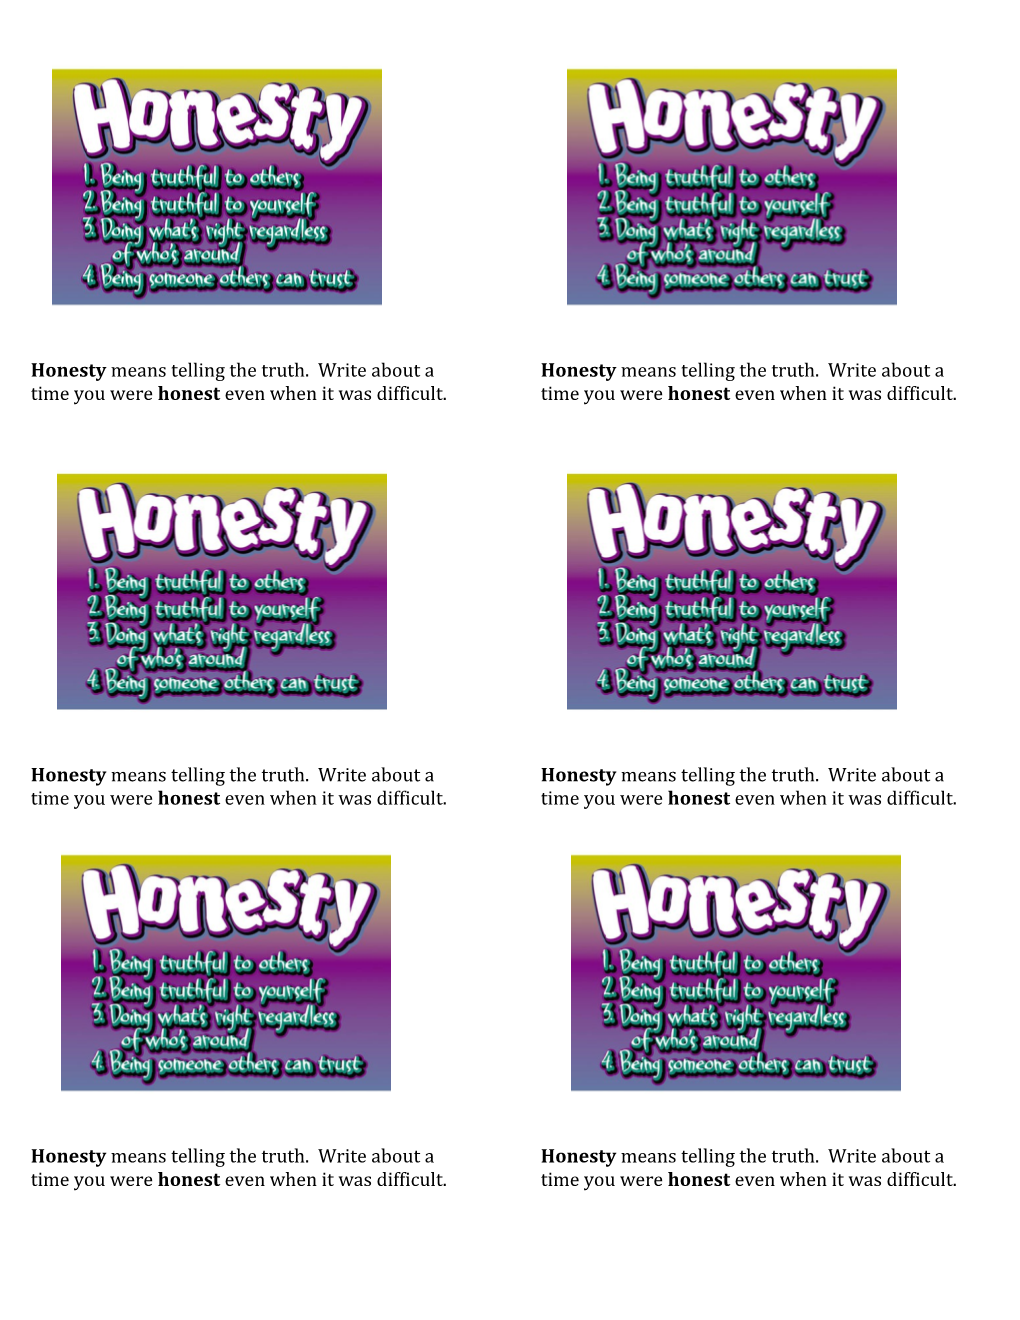 Honesty Means Telling the Truth. Write About a Time You Were Honest Even When It Was Difficult